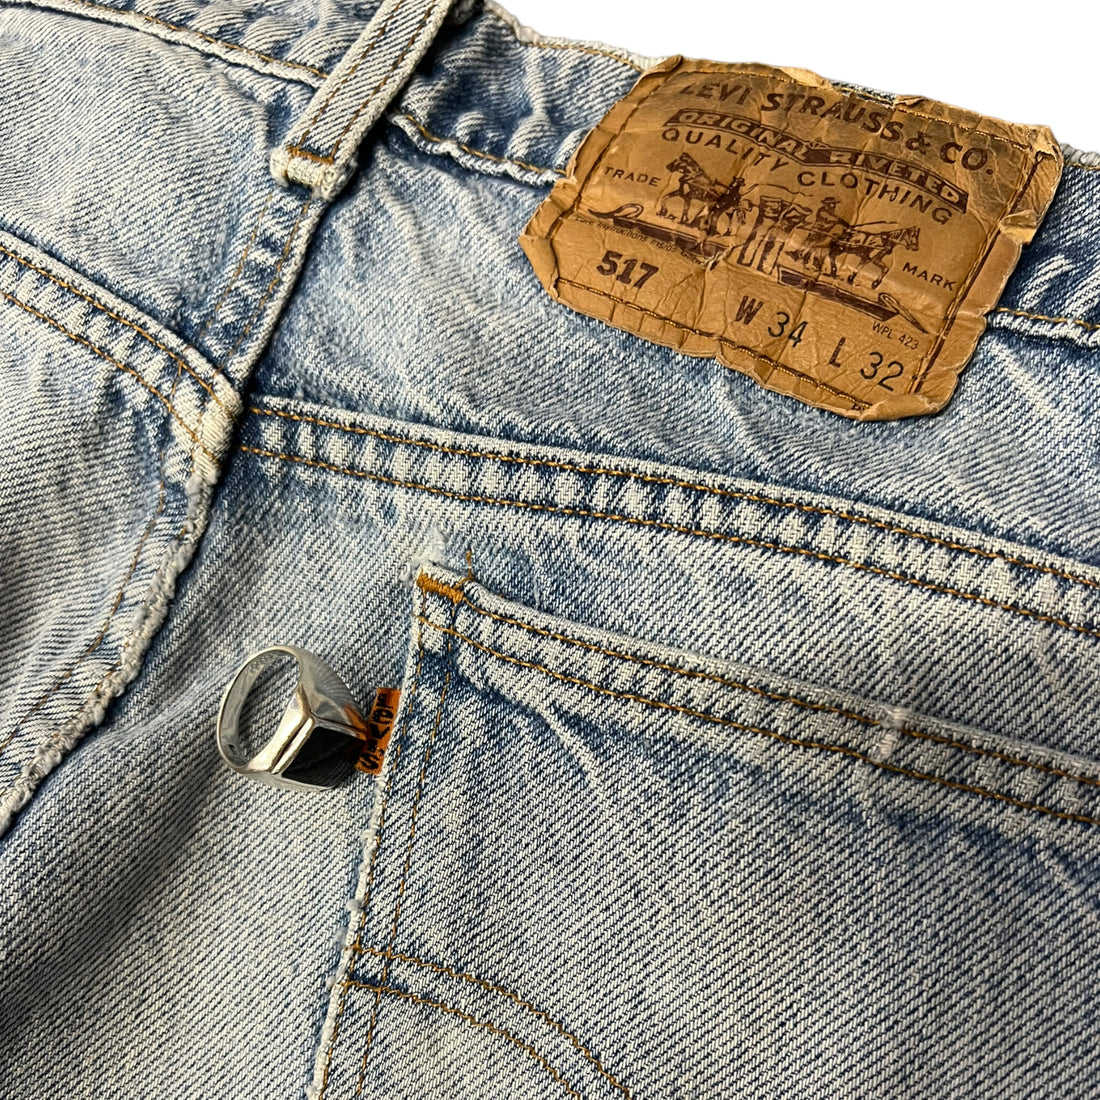 LEVI’S 517 USA MADE PATCHED BLUE JEANS ‘34X32’ - 1990S